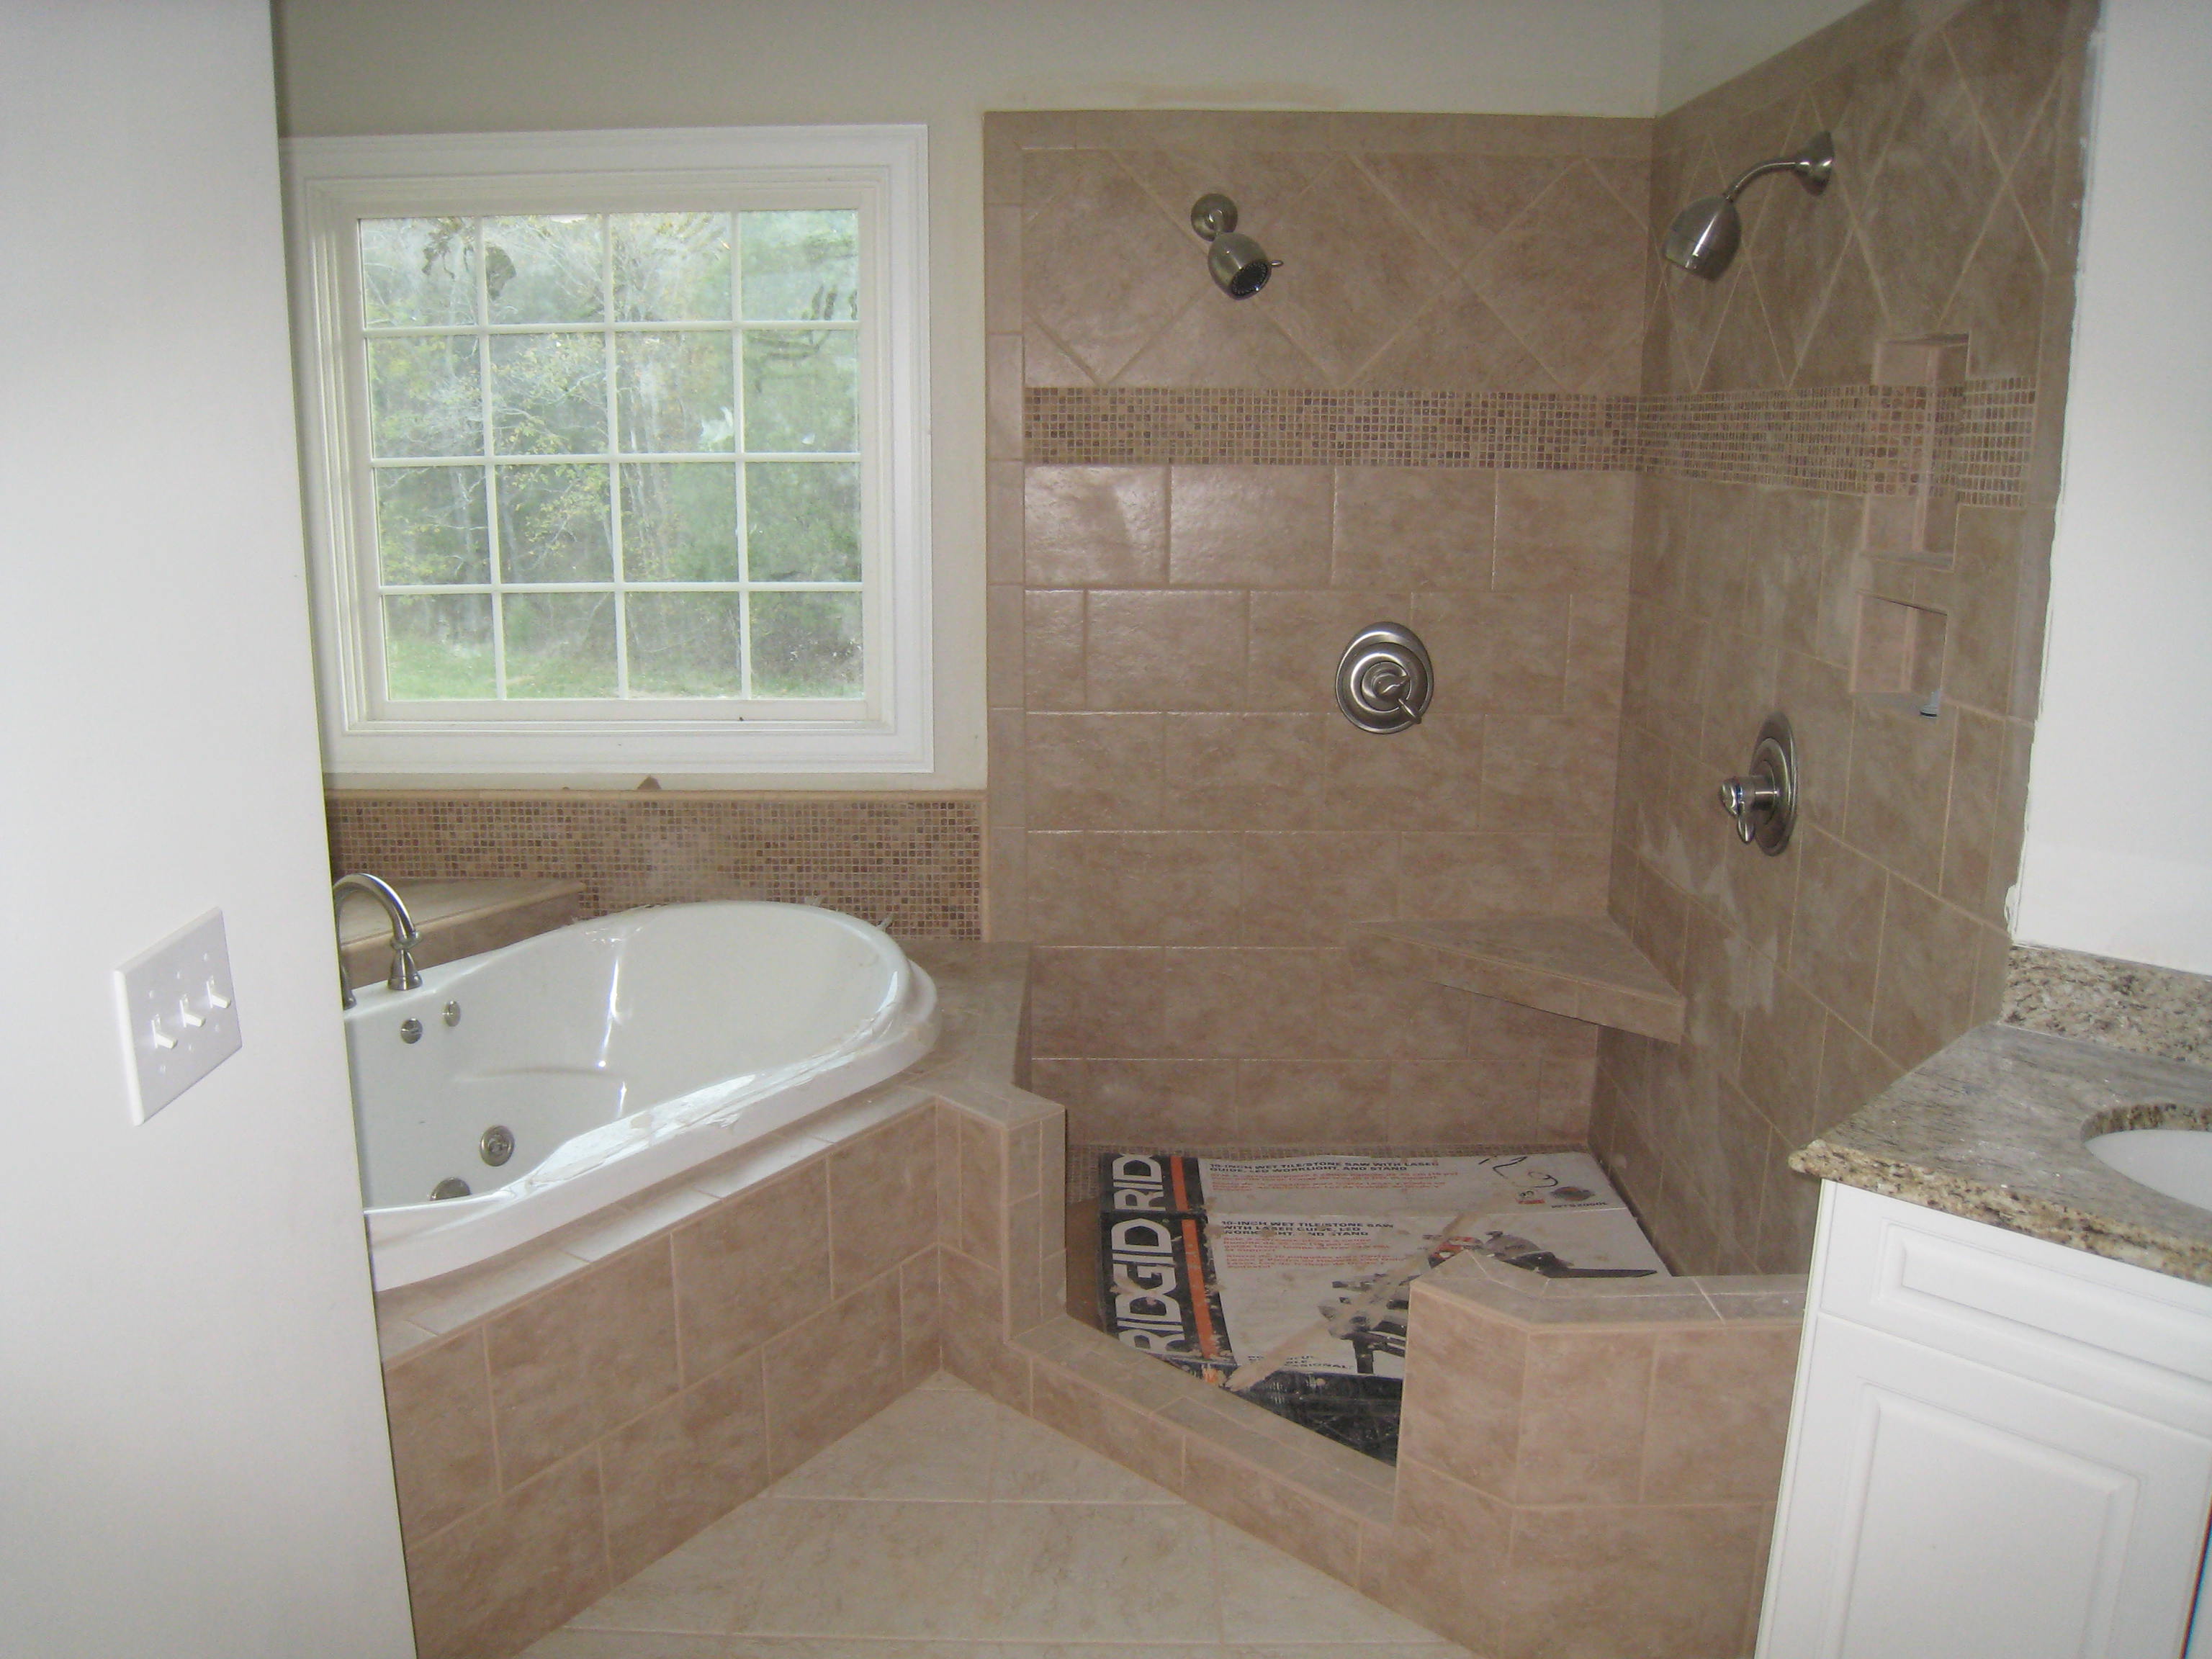 Custom bathtub and shower installations finished by home remodeling company Hedrick Creative Building, LLC in Lexington, NC